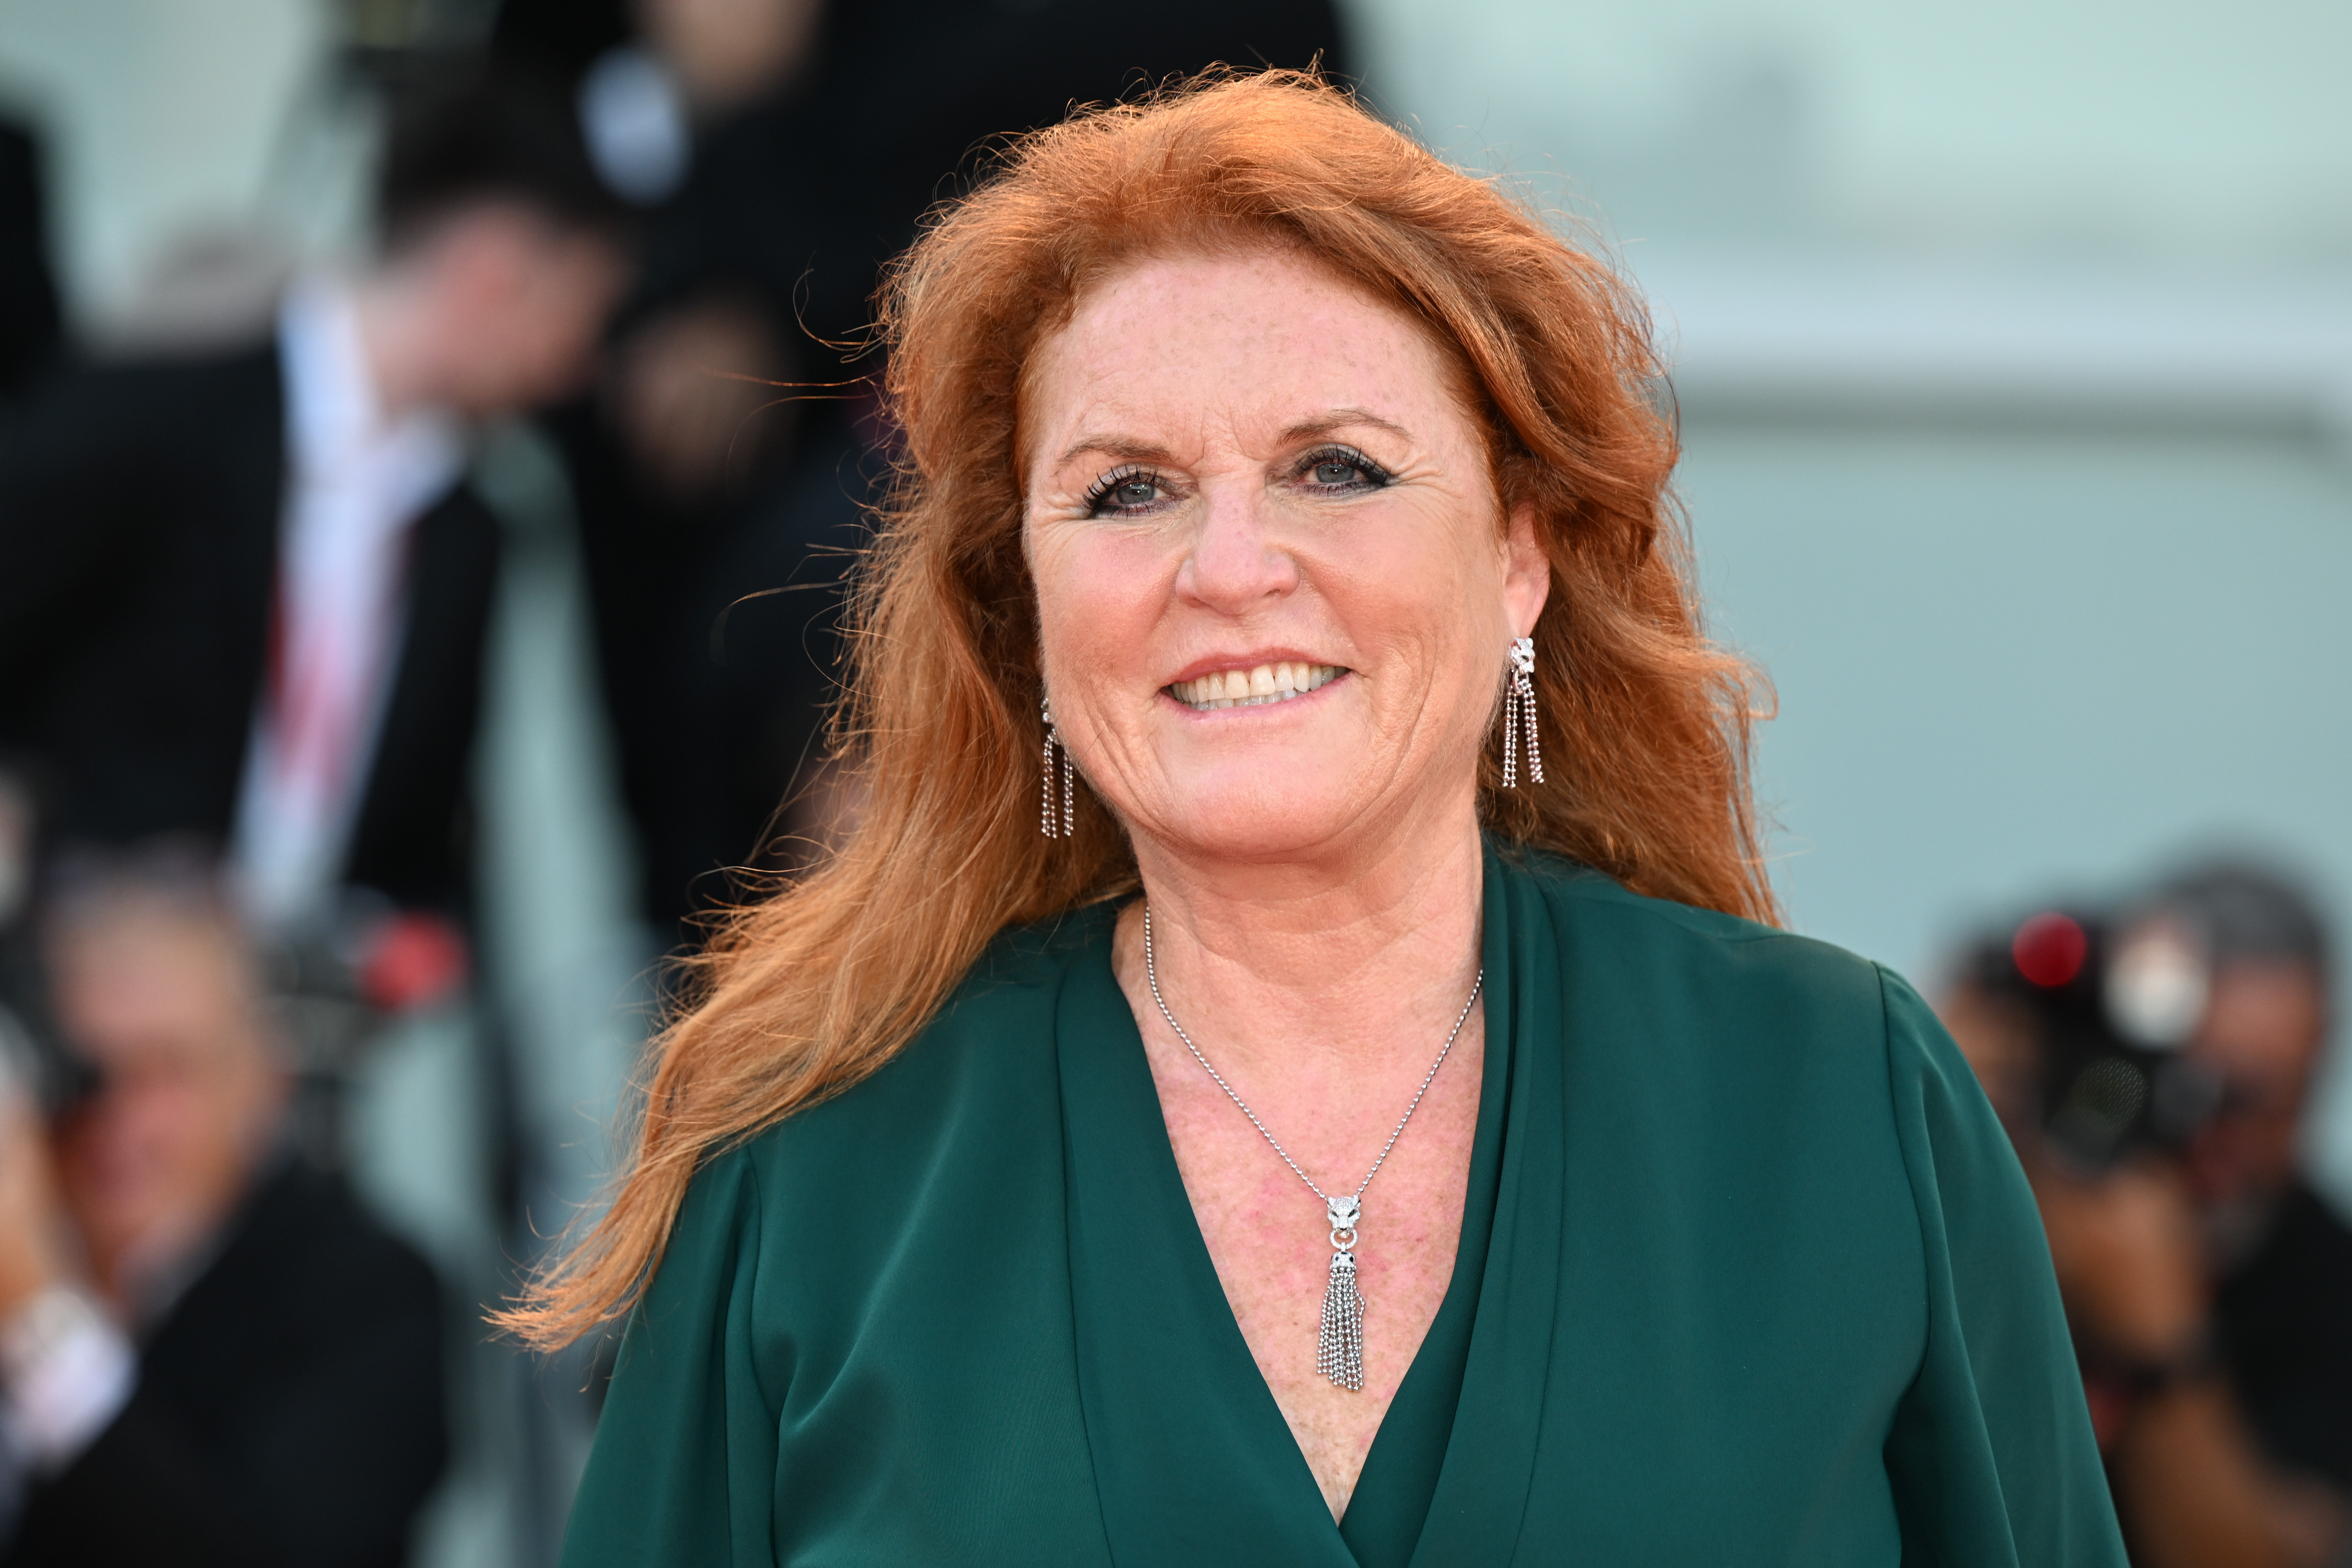 Sarah Ferguson, Duchess of York, at the 79th Venice International Film Festival in 2022 | Source: Getty Images